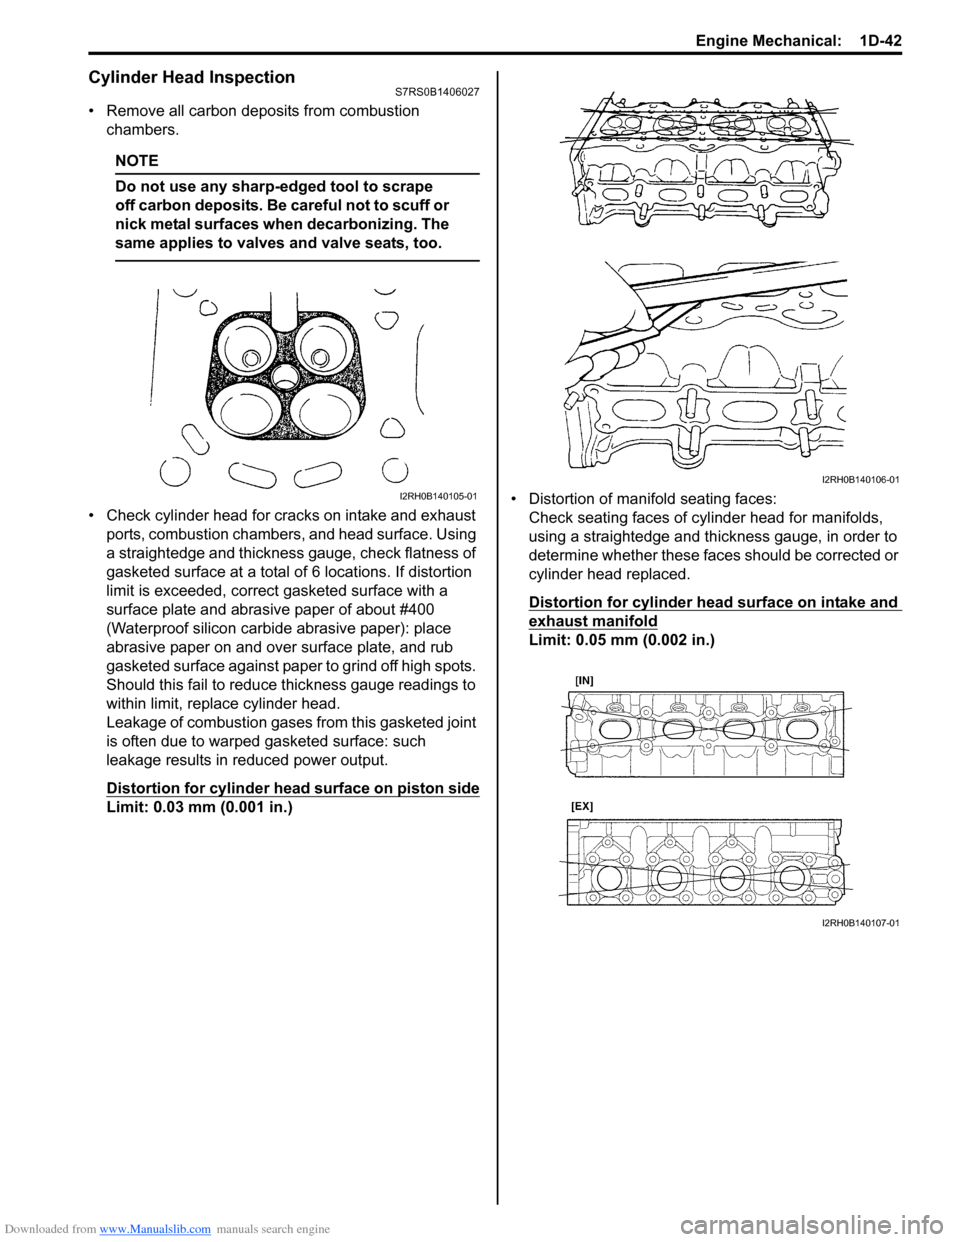 SUZUKI SWIFT 2006 2.G Service Workshop Manual Downloaded from www.Manualslib.com manuals search engine Engine Mechanical:  1D-42
Cylinder Head InspectionS7RS0B1406027
• Remove all carbon deposits from combustion chambers.
NOTE
Do not use any sh